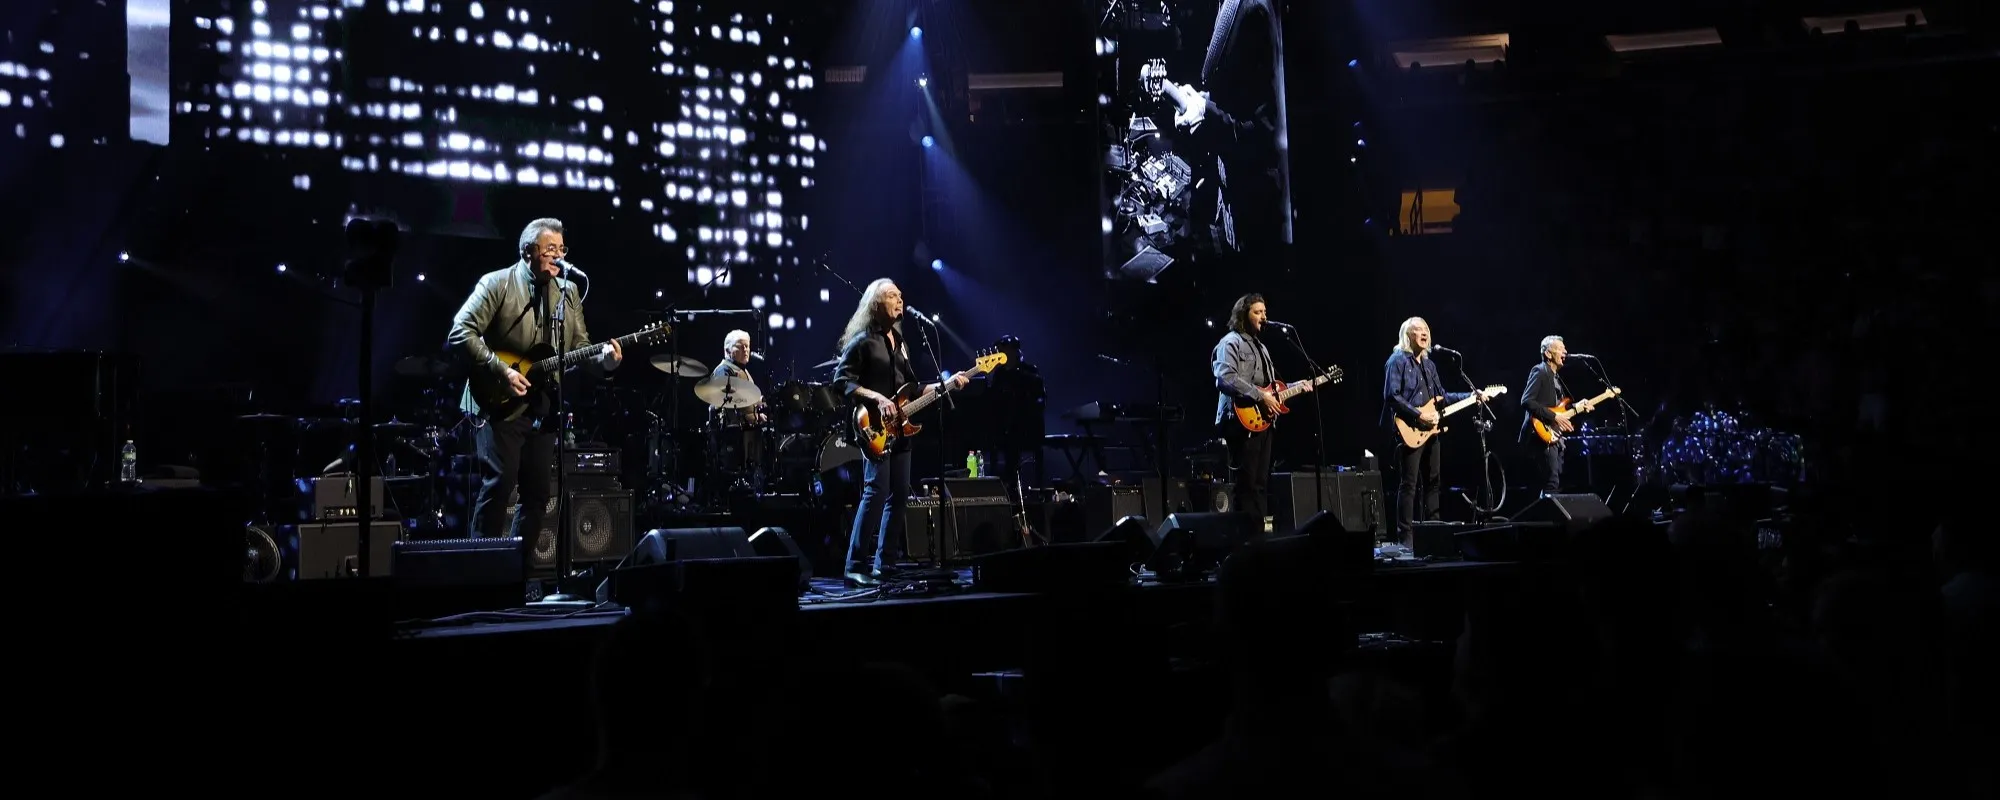 The Eagles Announce The Long Goodbye Tour is Heading to the U.K. and Netherlands in May & June